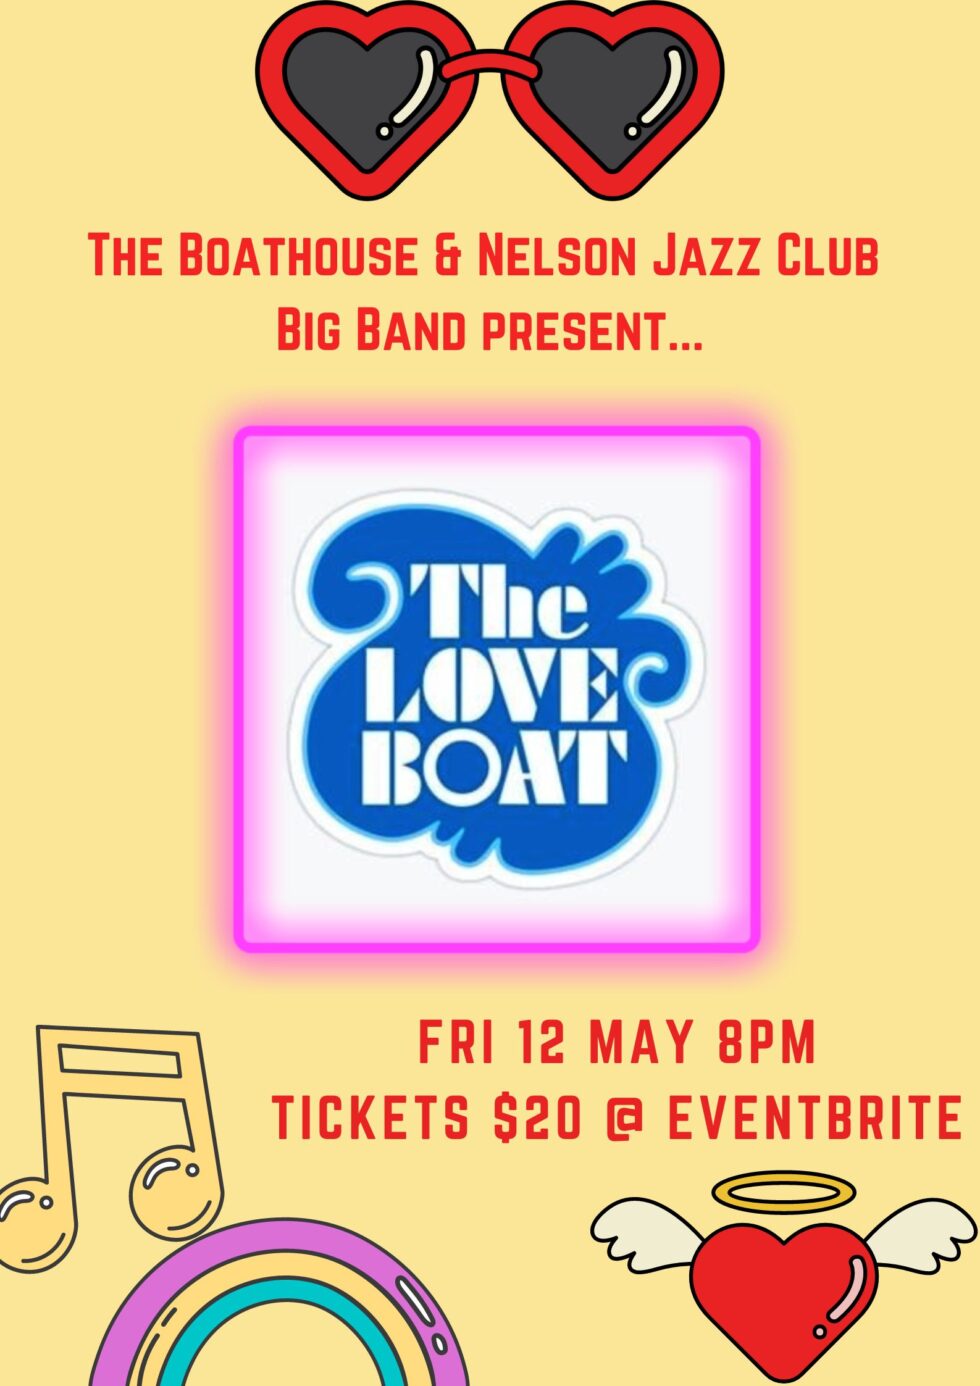 The Boathouse & The Nelson Jazz Club Big Band Presents The Love Boat 🗓